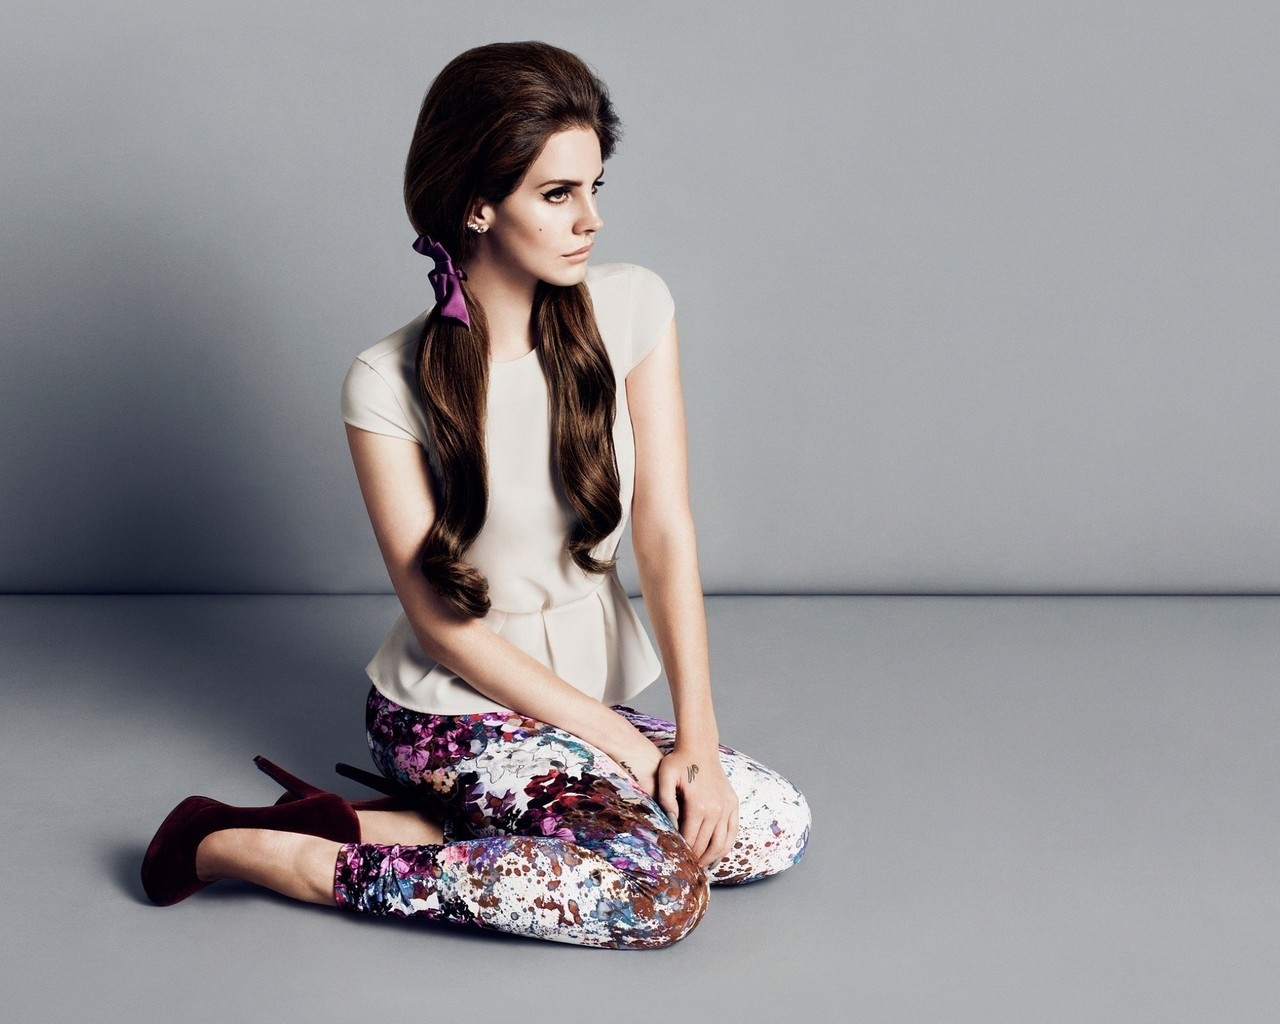 Lana Del Rey Cool for 1280 x 1024 resolution